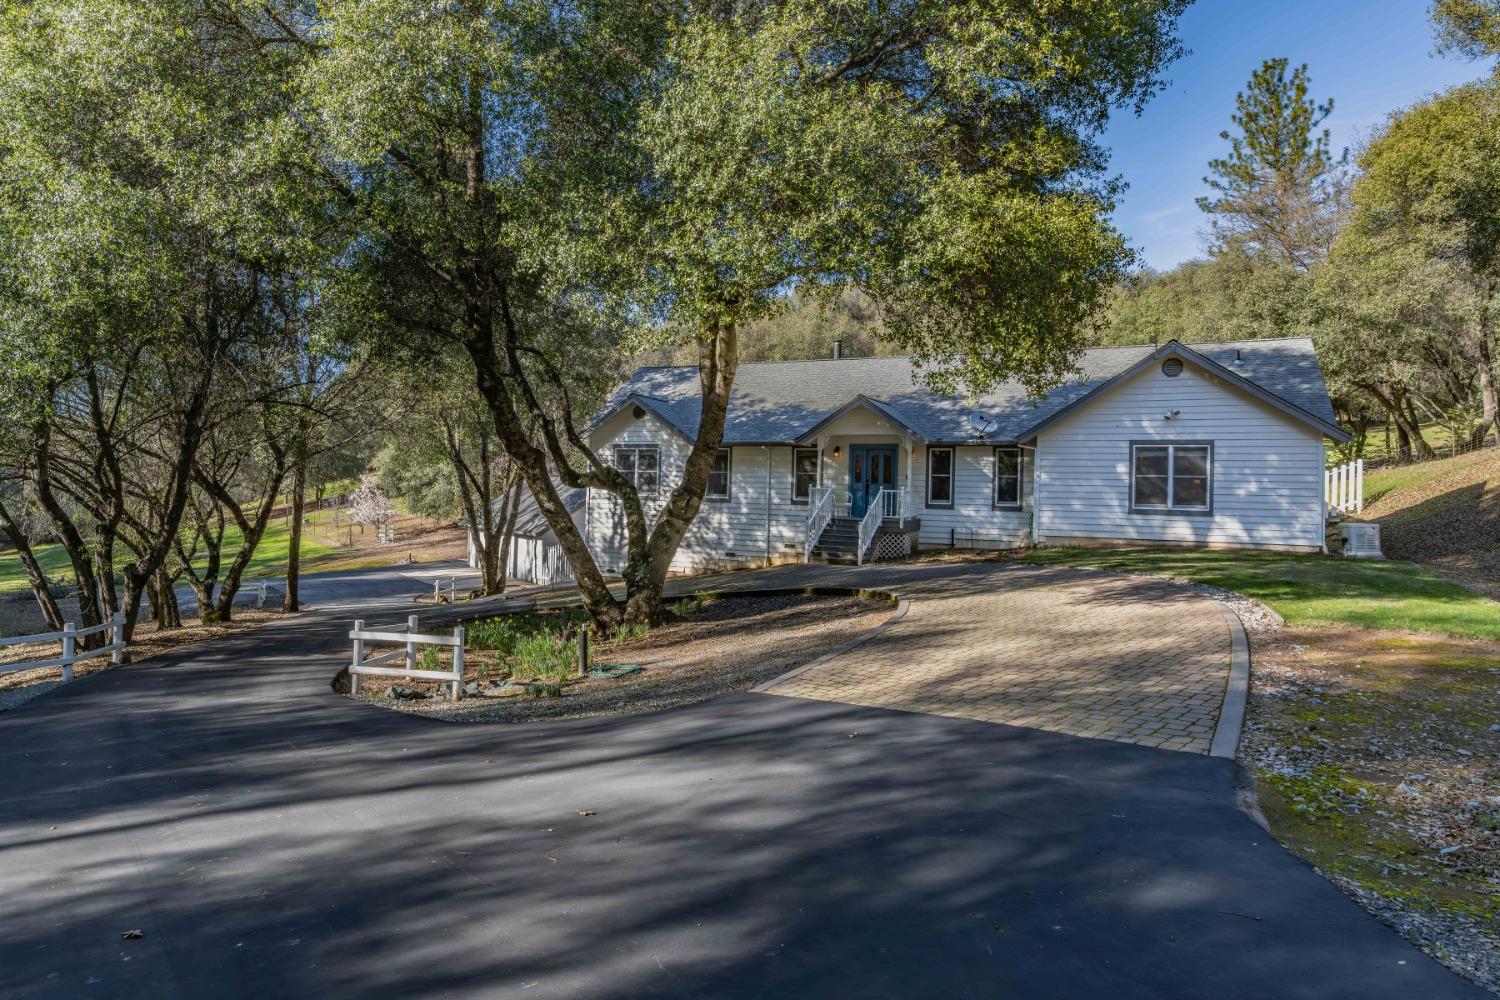 Photo of 13191 N Hill Dr in Jackson, CA